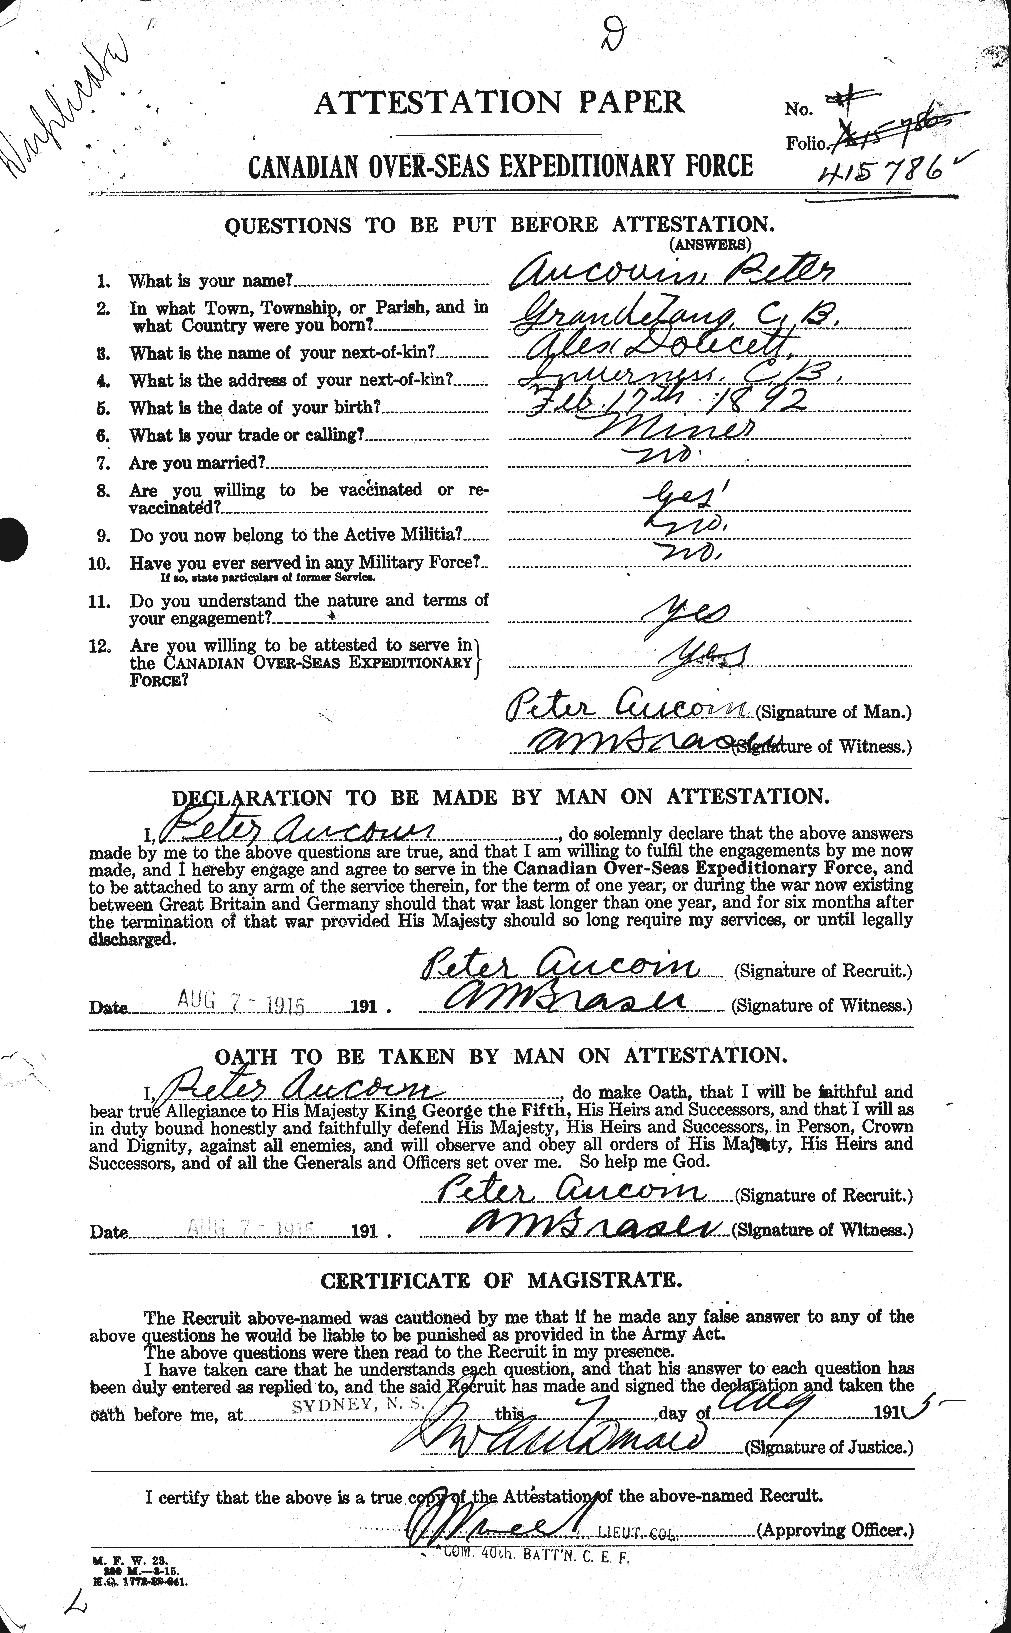 Personnel Records of the First World War - CEF 224537a